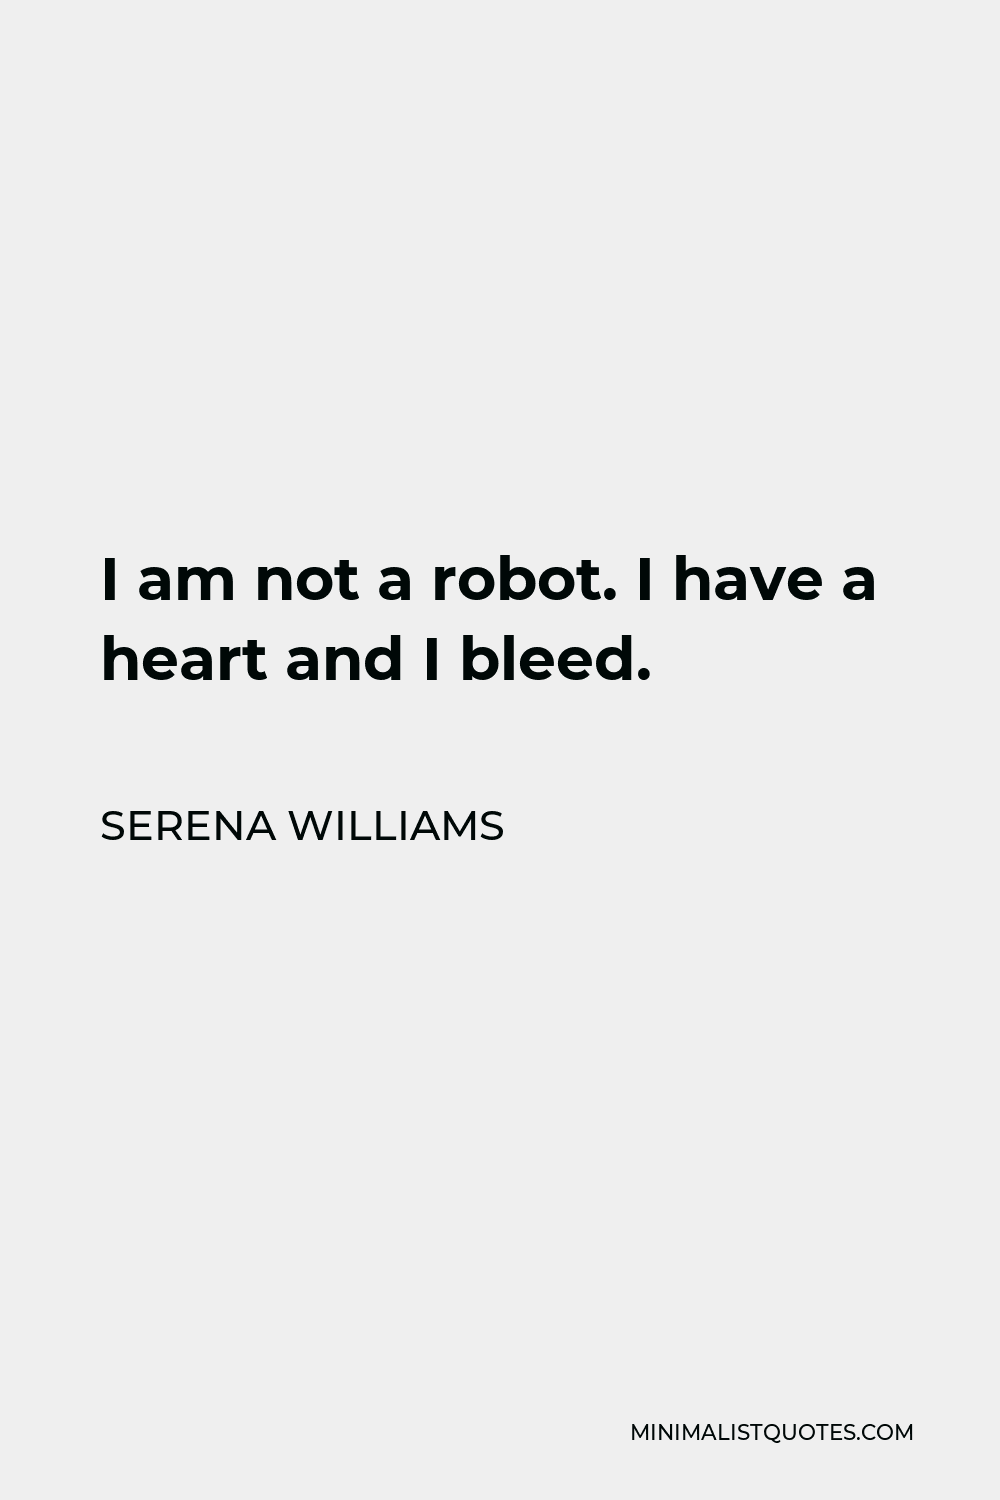 Serena Williams Quote - I am not a robot. I have a heart and I bleed.